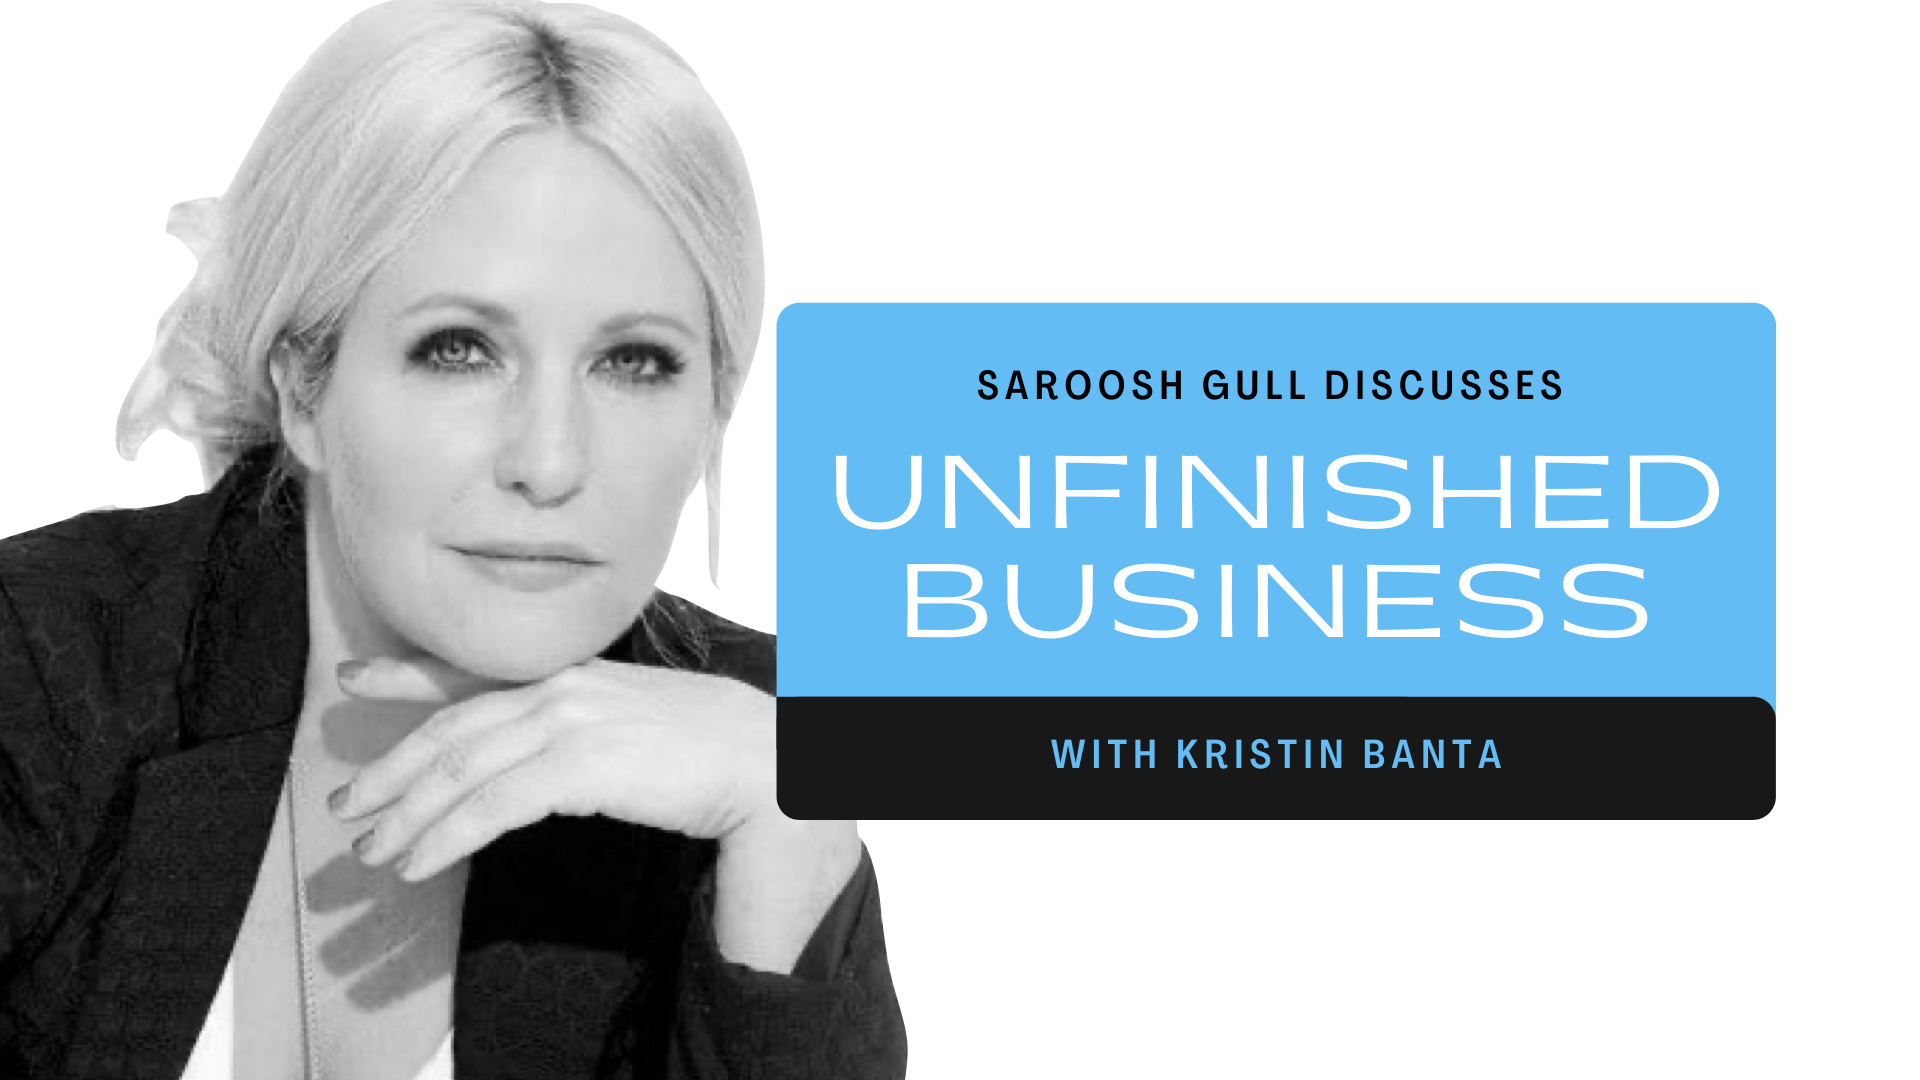 UNFINISHED BUSINESS - with Kristin Banta